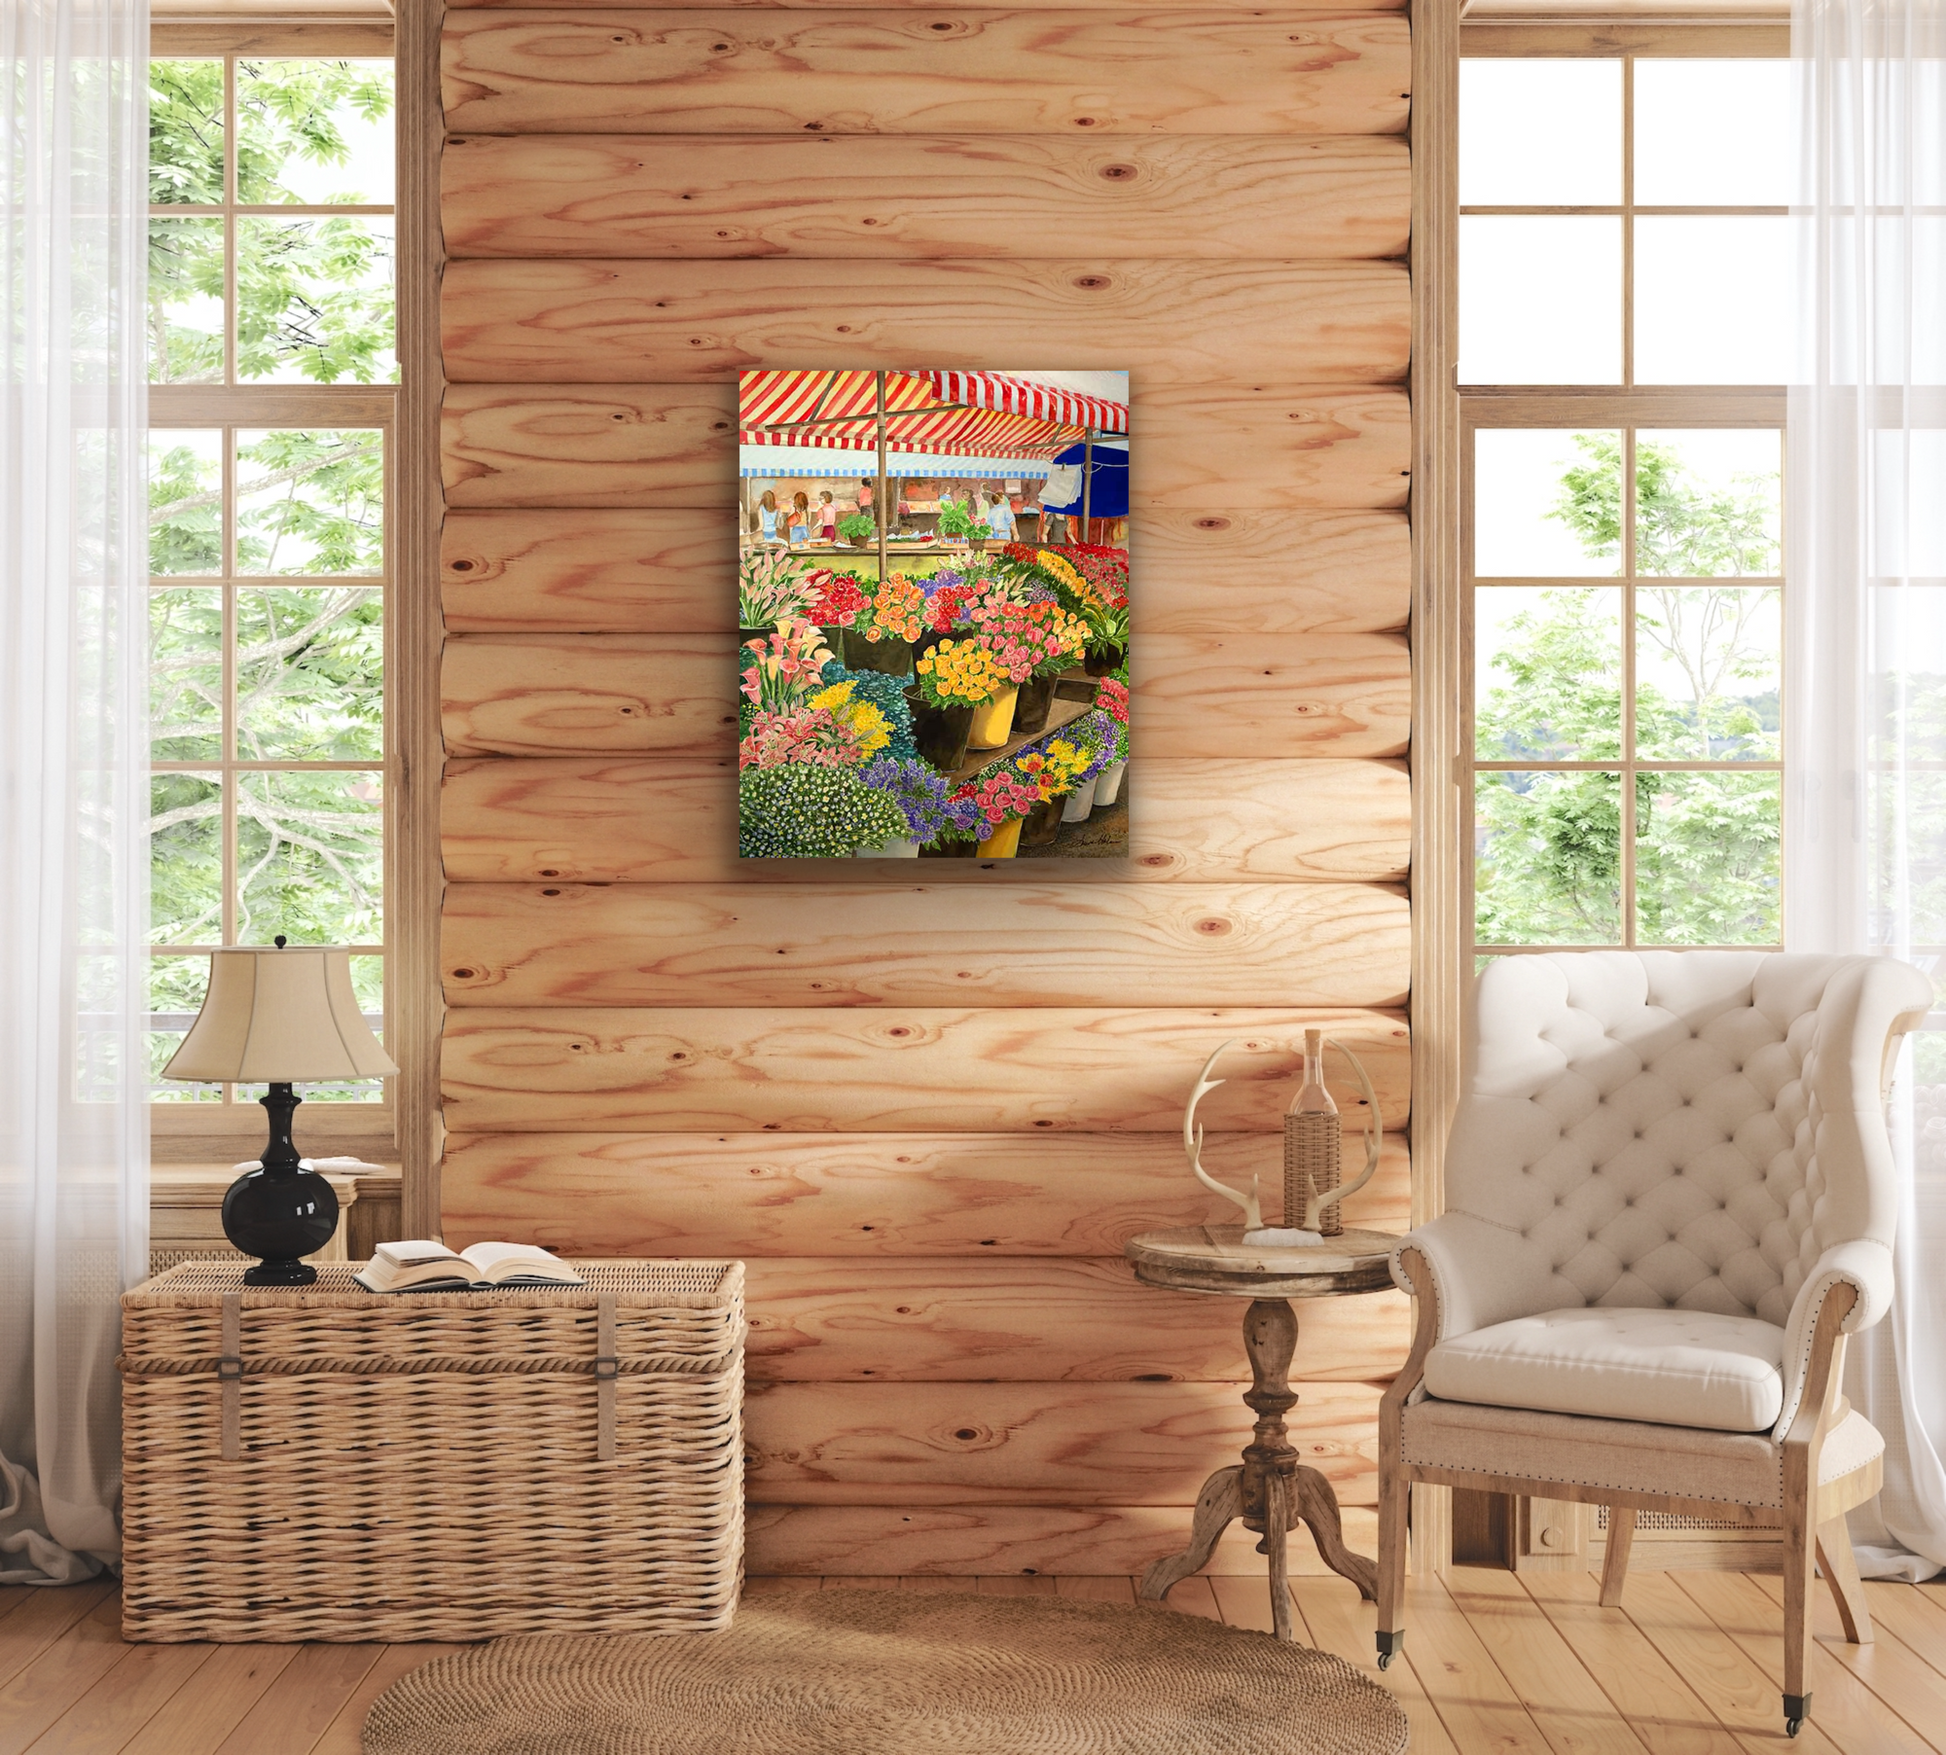 Dress up any room with wall art.  Flower market looks amazing in this log style home.